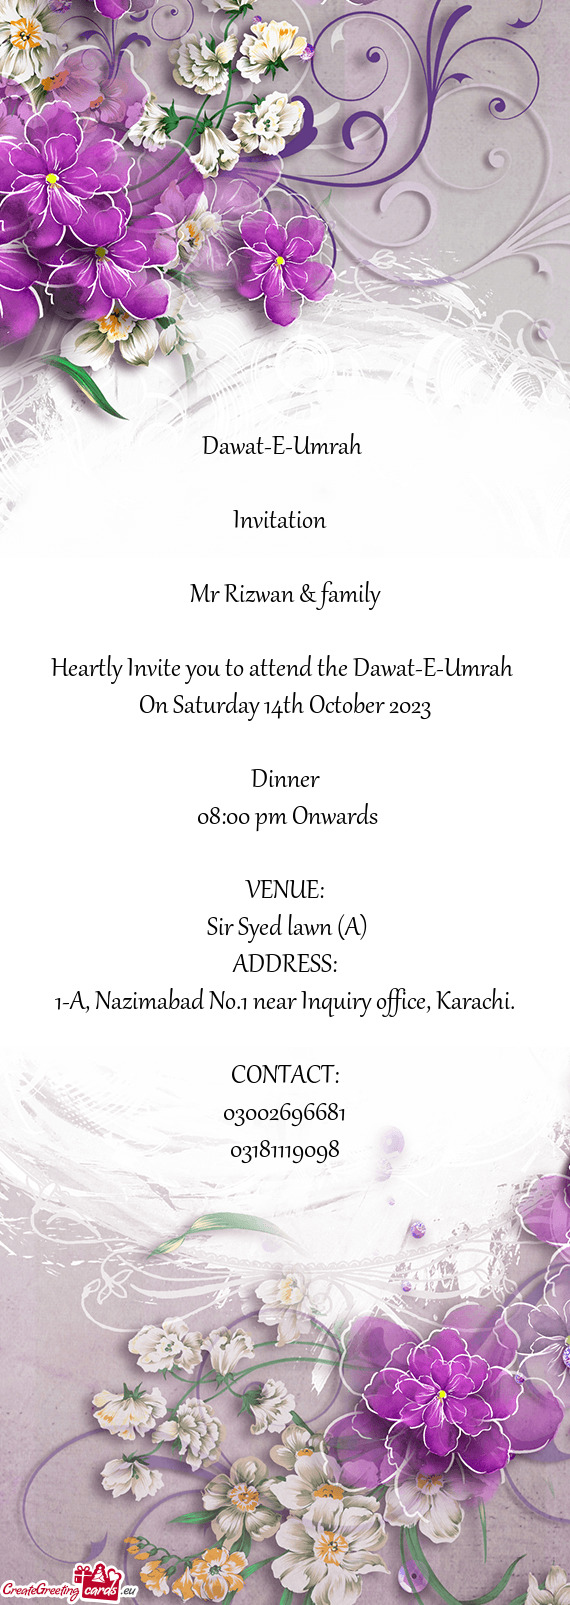 Heartly Invite you to attend the Dawat-E-Umrah